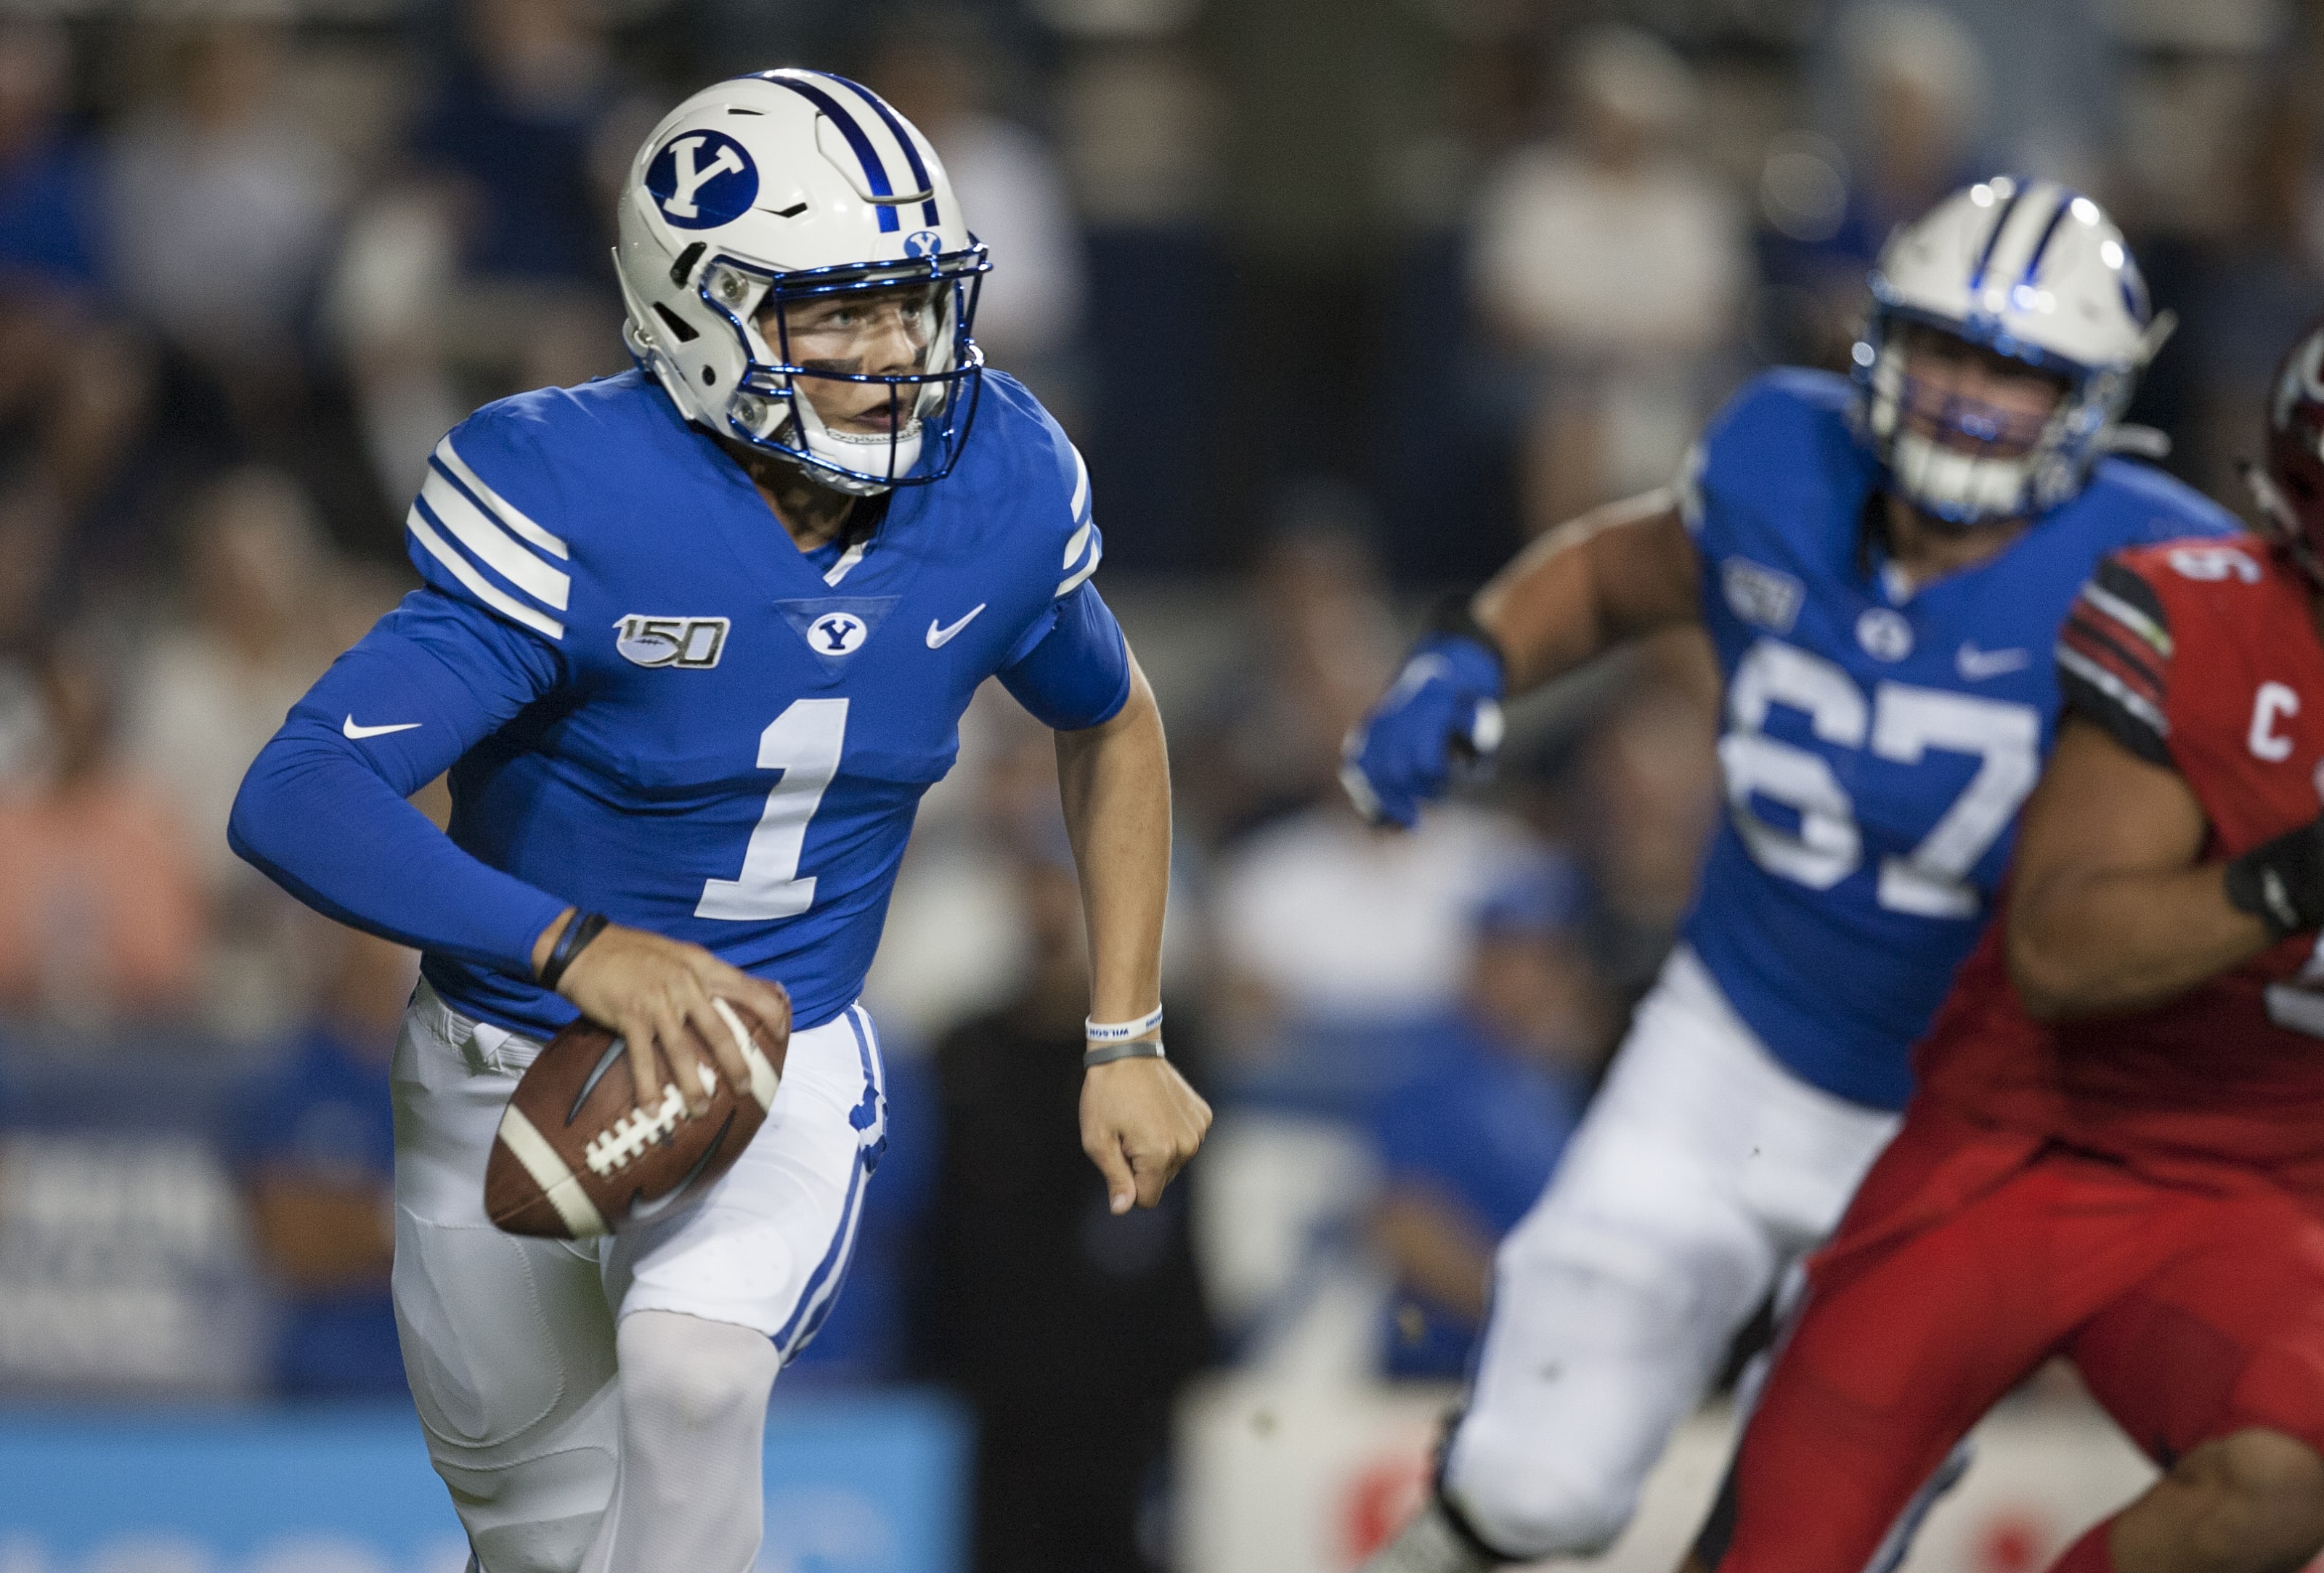 49ers 2021 mock draft: Trading up for BYU QB Zach Wilson